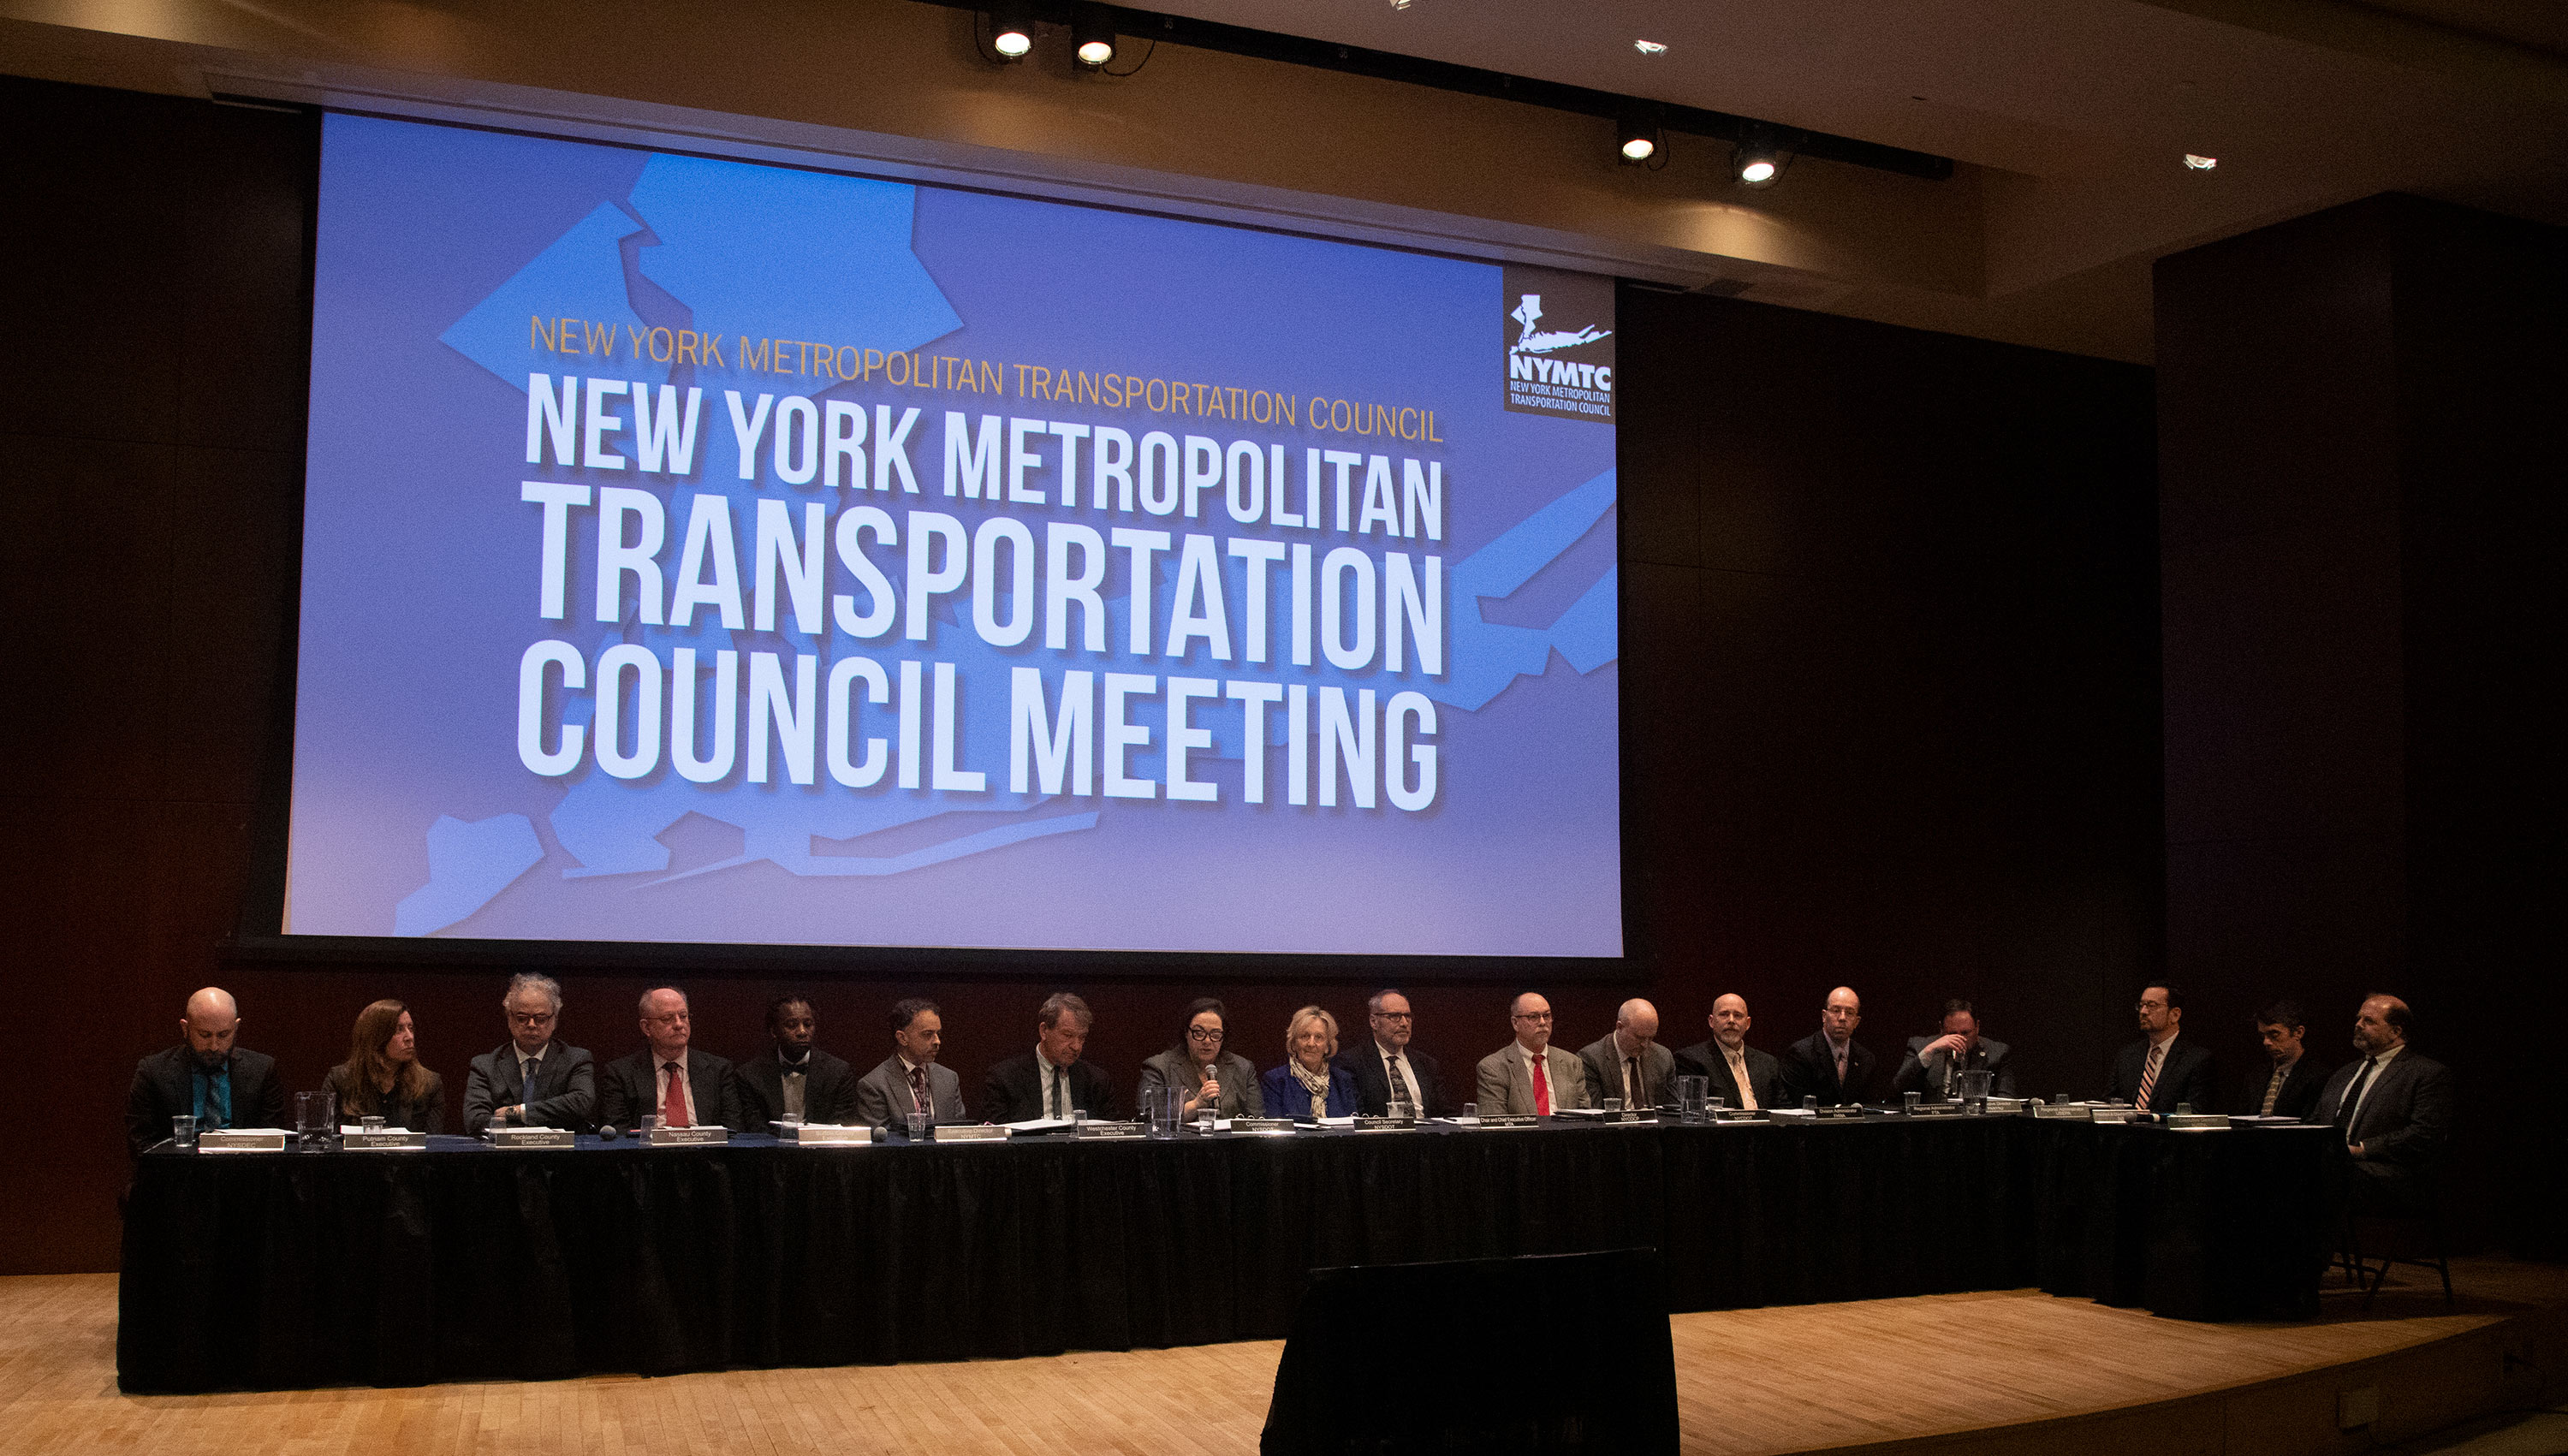 The New York Metropolitan Transportation Council (NYMTC) held its Annual Council Meeting